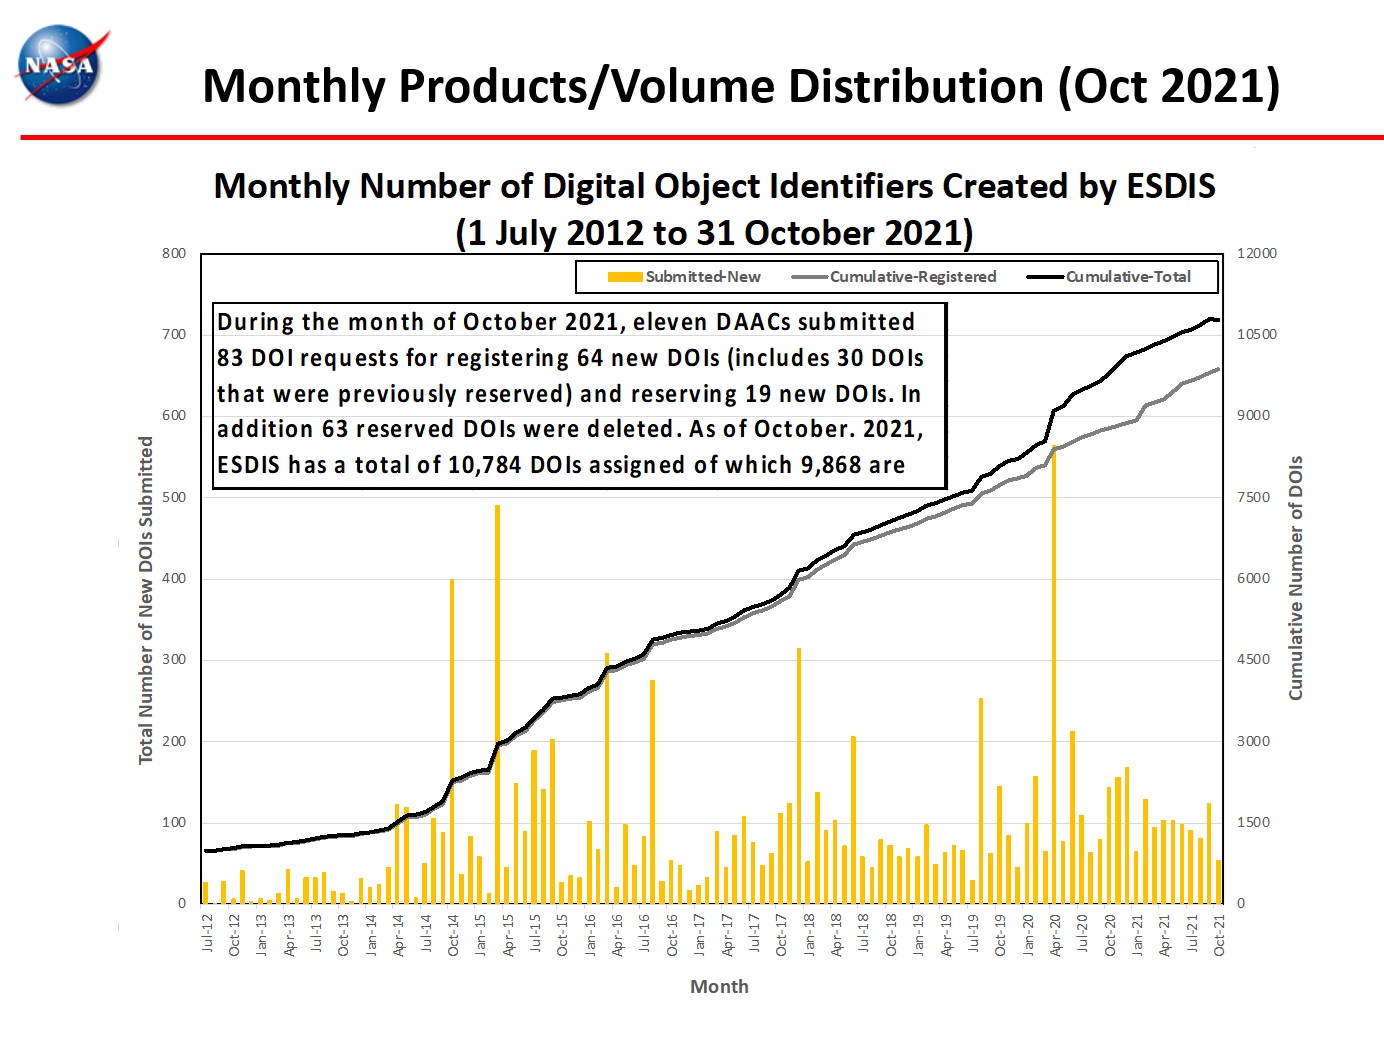 Monthly products/volume distribution, October 2021